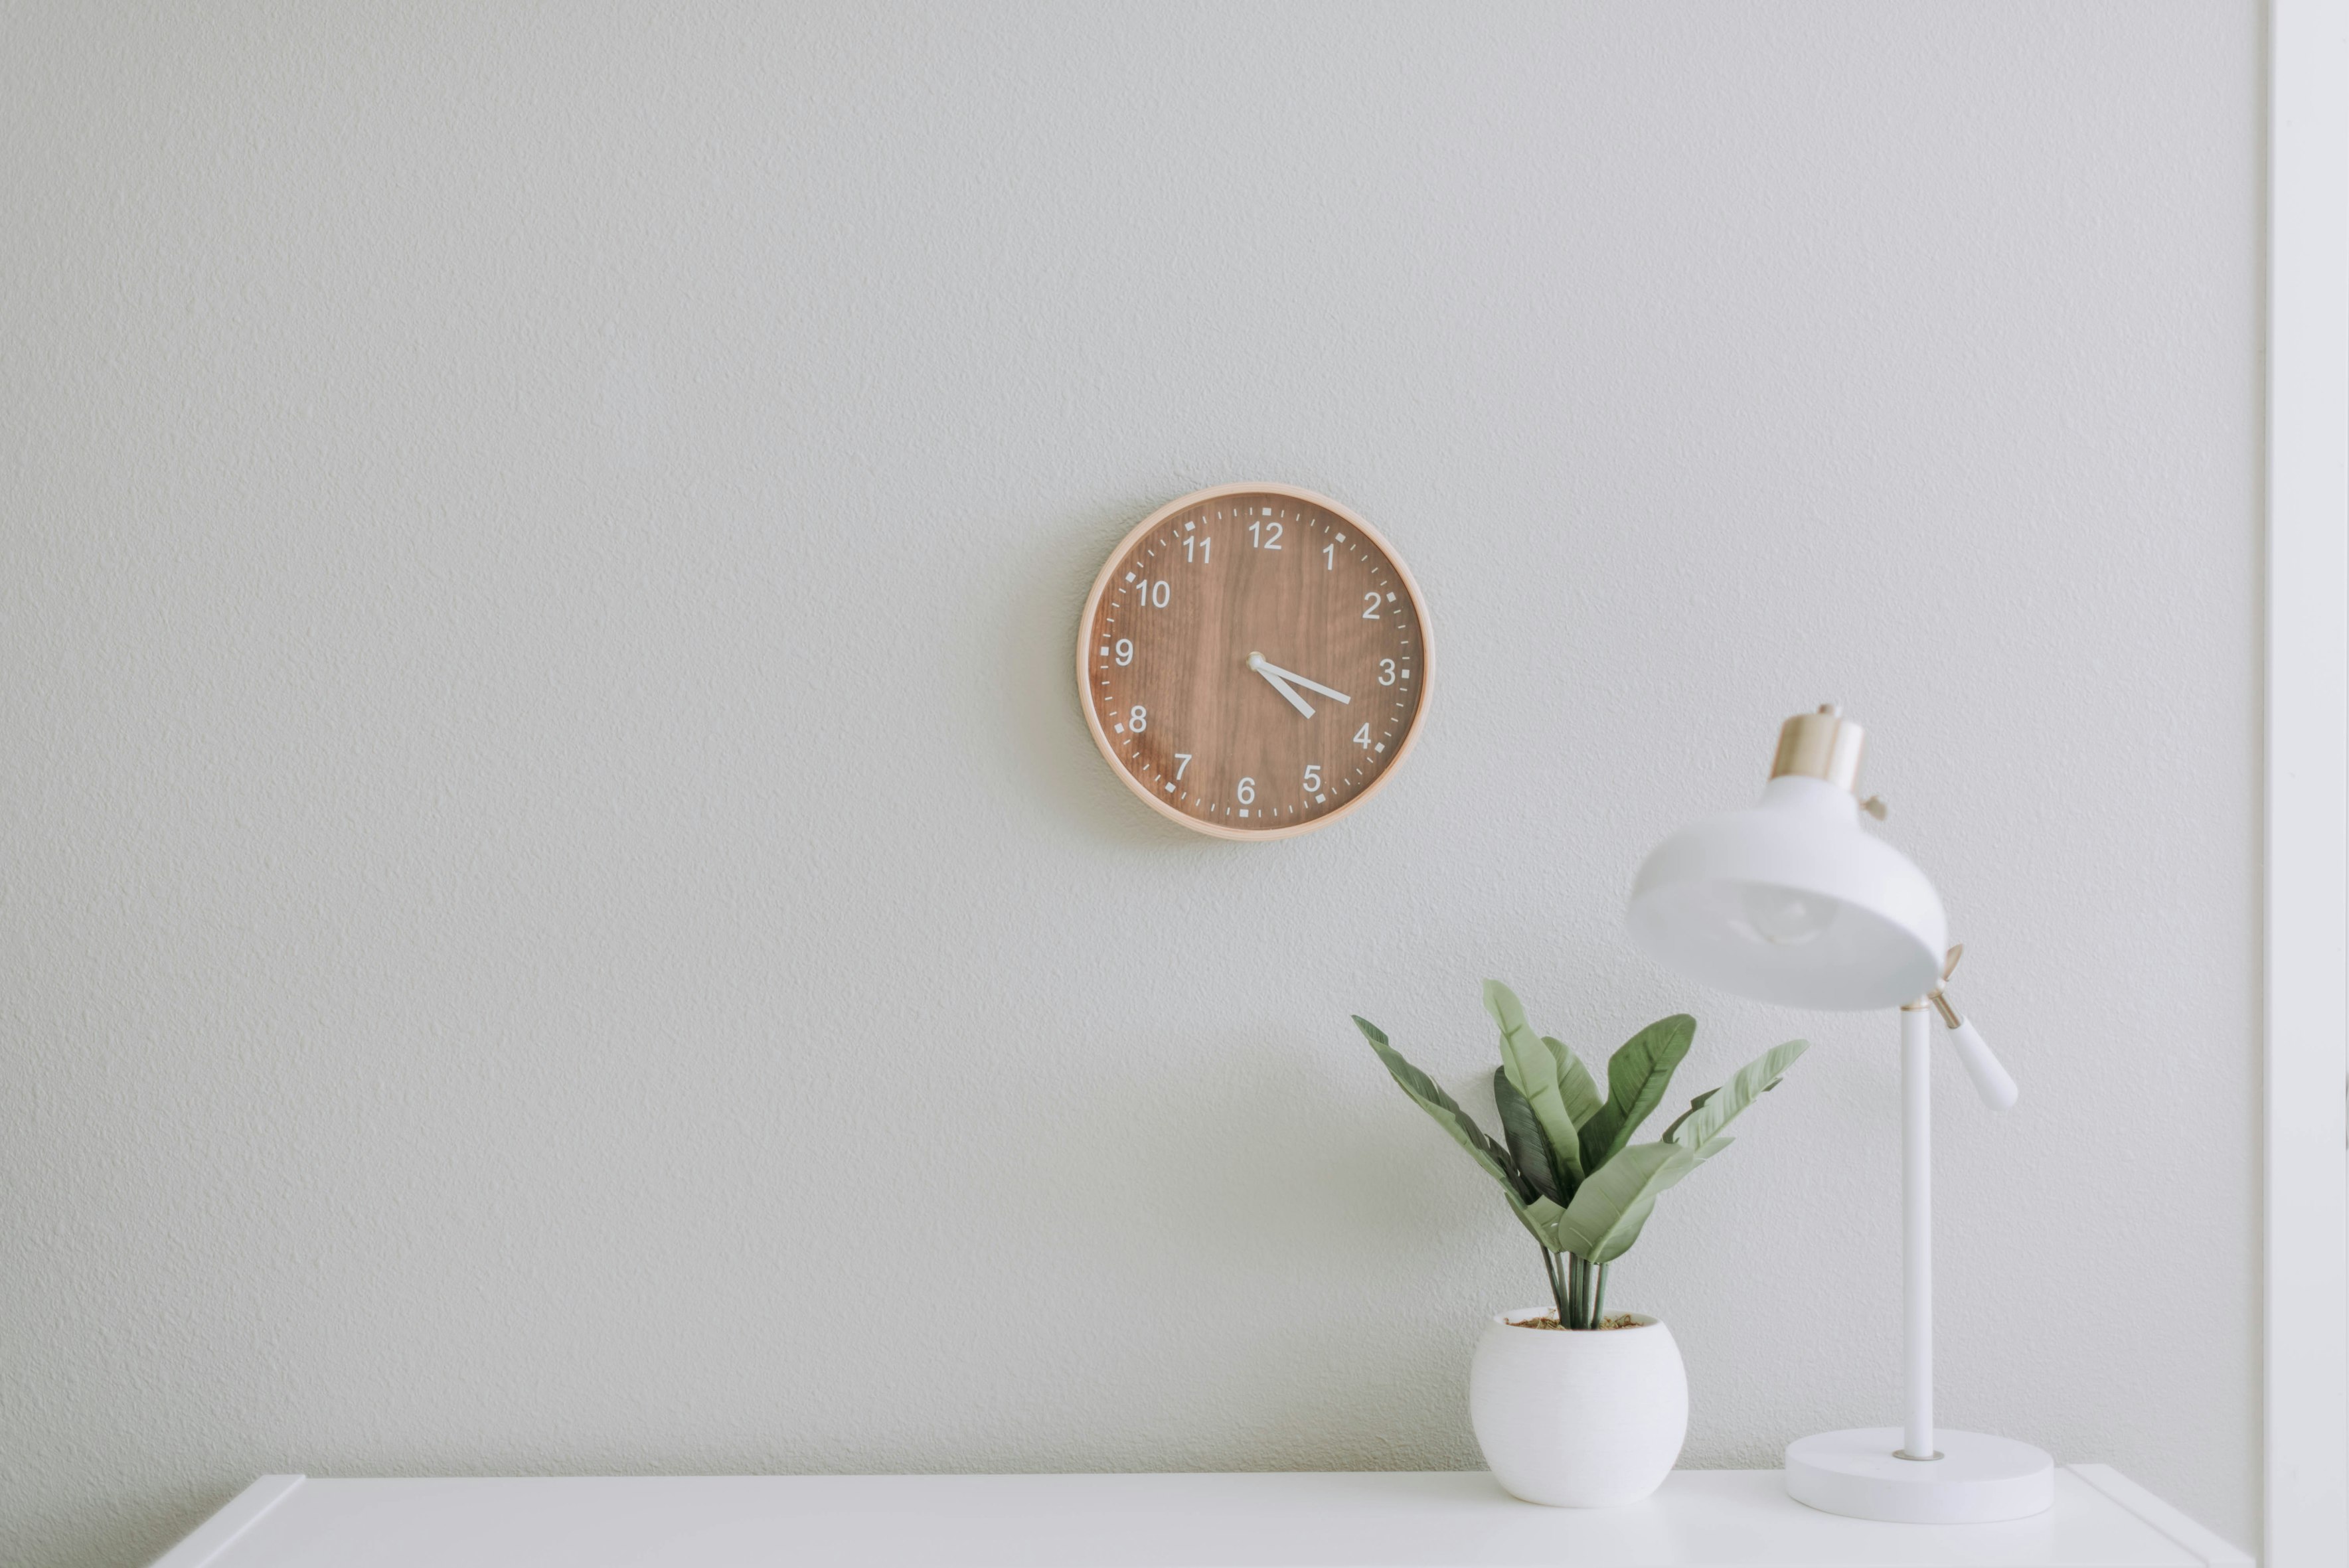 Plain white wall with clock on the wall.